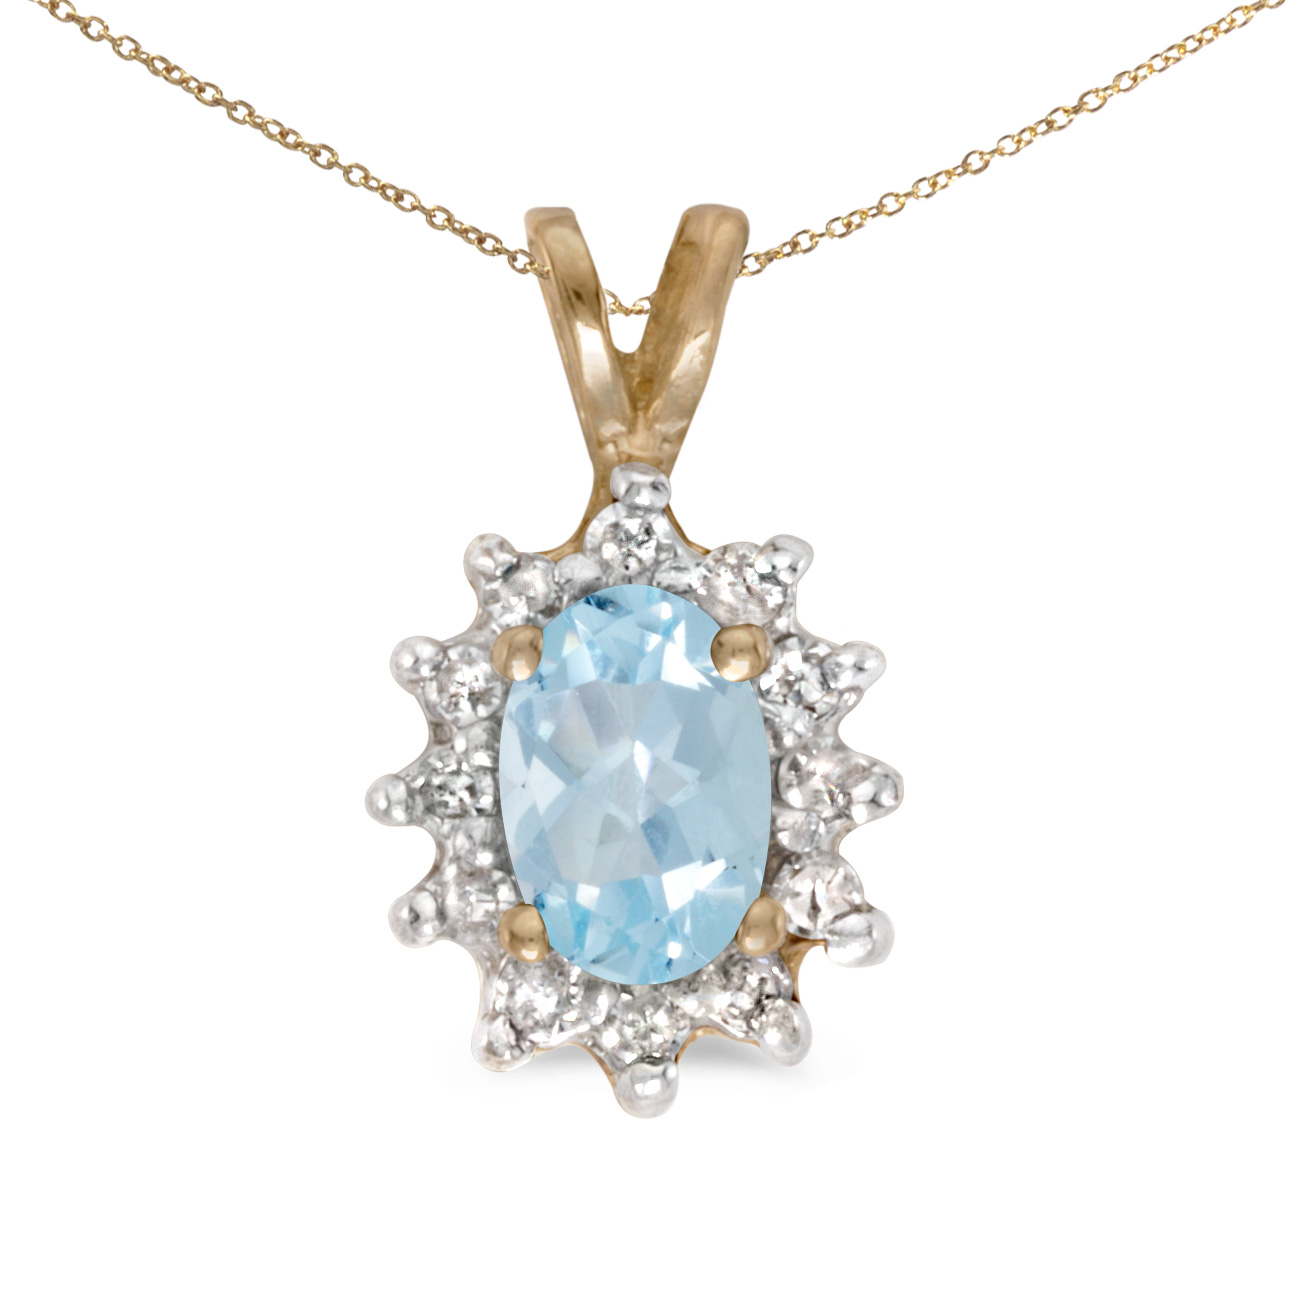 This 14k yellow gold oval aquamarine and diamond pendant features a 6x4 mm genuine natural aquama...